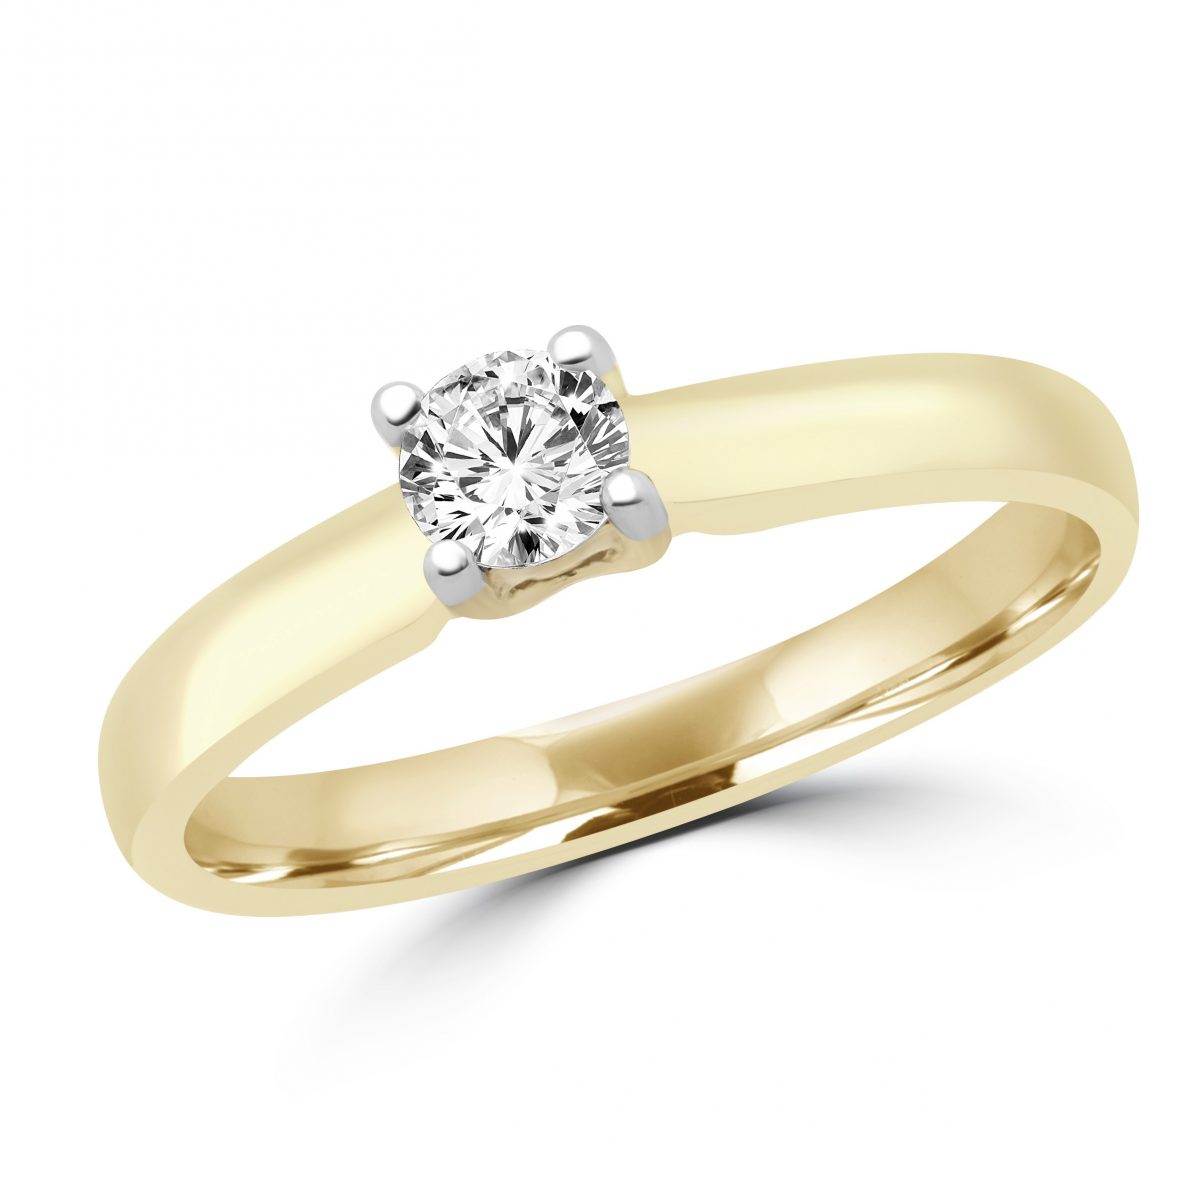 Classic solitaire engagement ring 0.20 (ctw) in 14k yellow gold